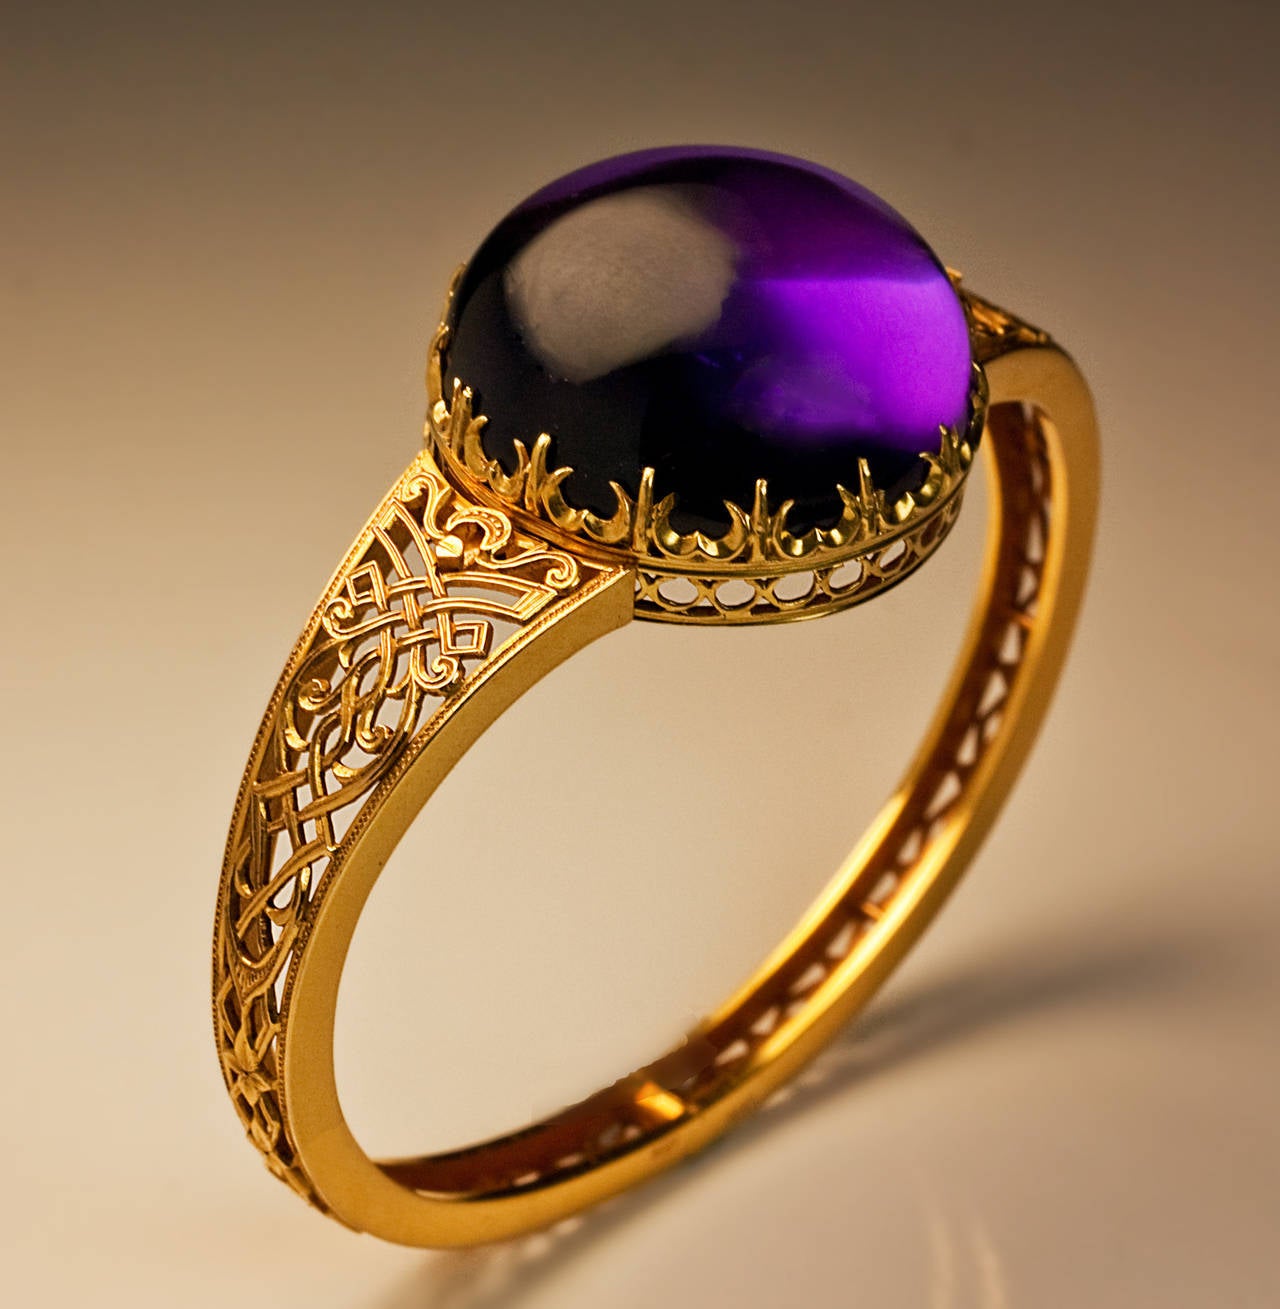 A 14K gold openwork hinged bracelet features a huge round cabochon cut amethyst (27.5 x 13.1 mm, approximately 70 carats) set in a crown like gold bezel.

The bracelet is decorated with an elaborate gold strapwork in medieval Gothic style. 

The